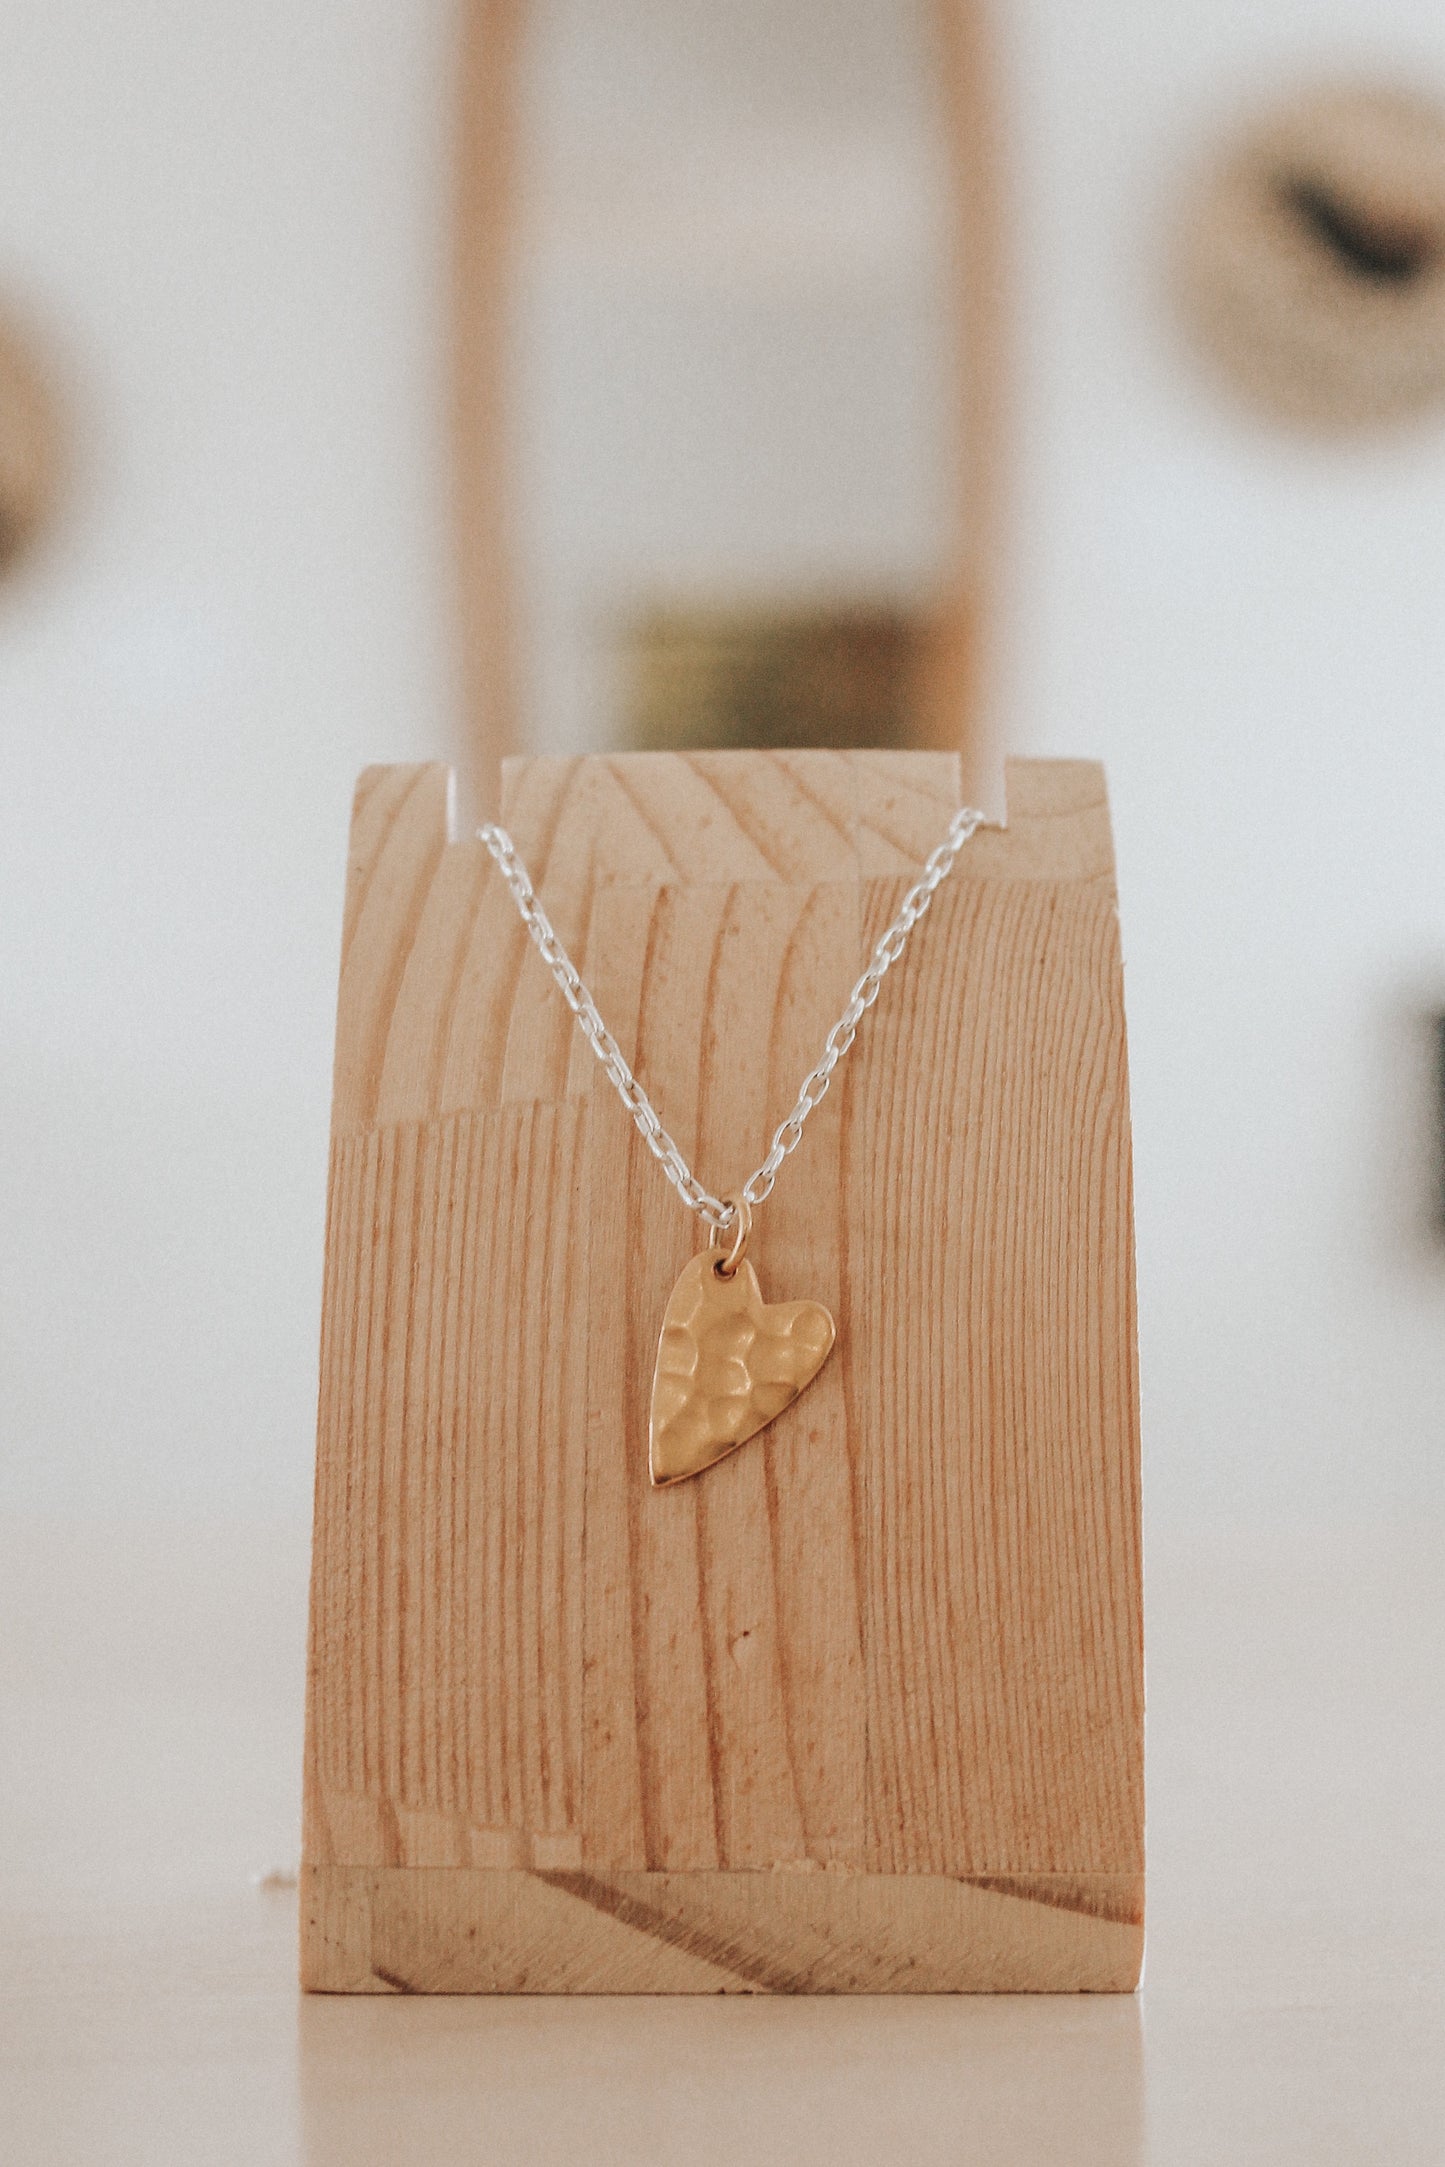 Imperfections of the Heart Necklace - Limited Edition - 24k gold plate and sterling silver